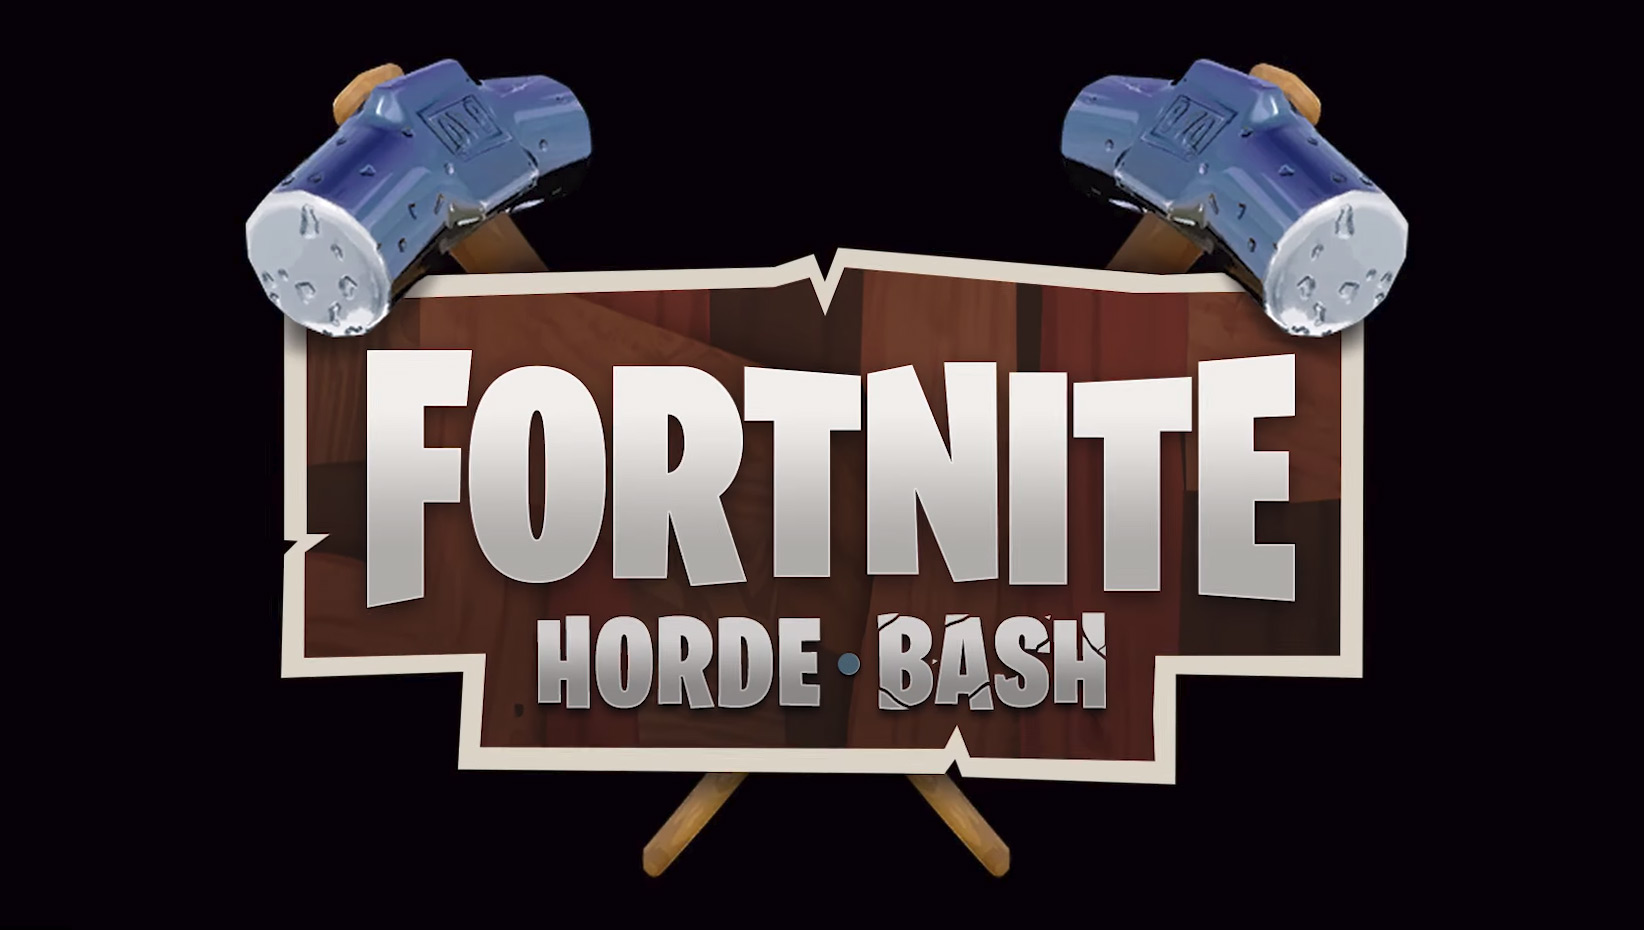 News: Fortnite to add Horde Bash mode on quest to become ... - 1644 x 930 jpeg 147kB